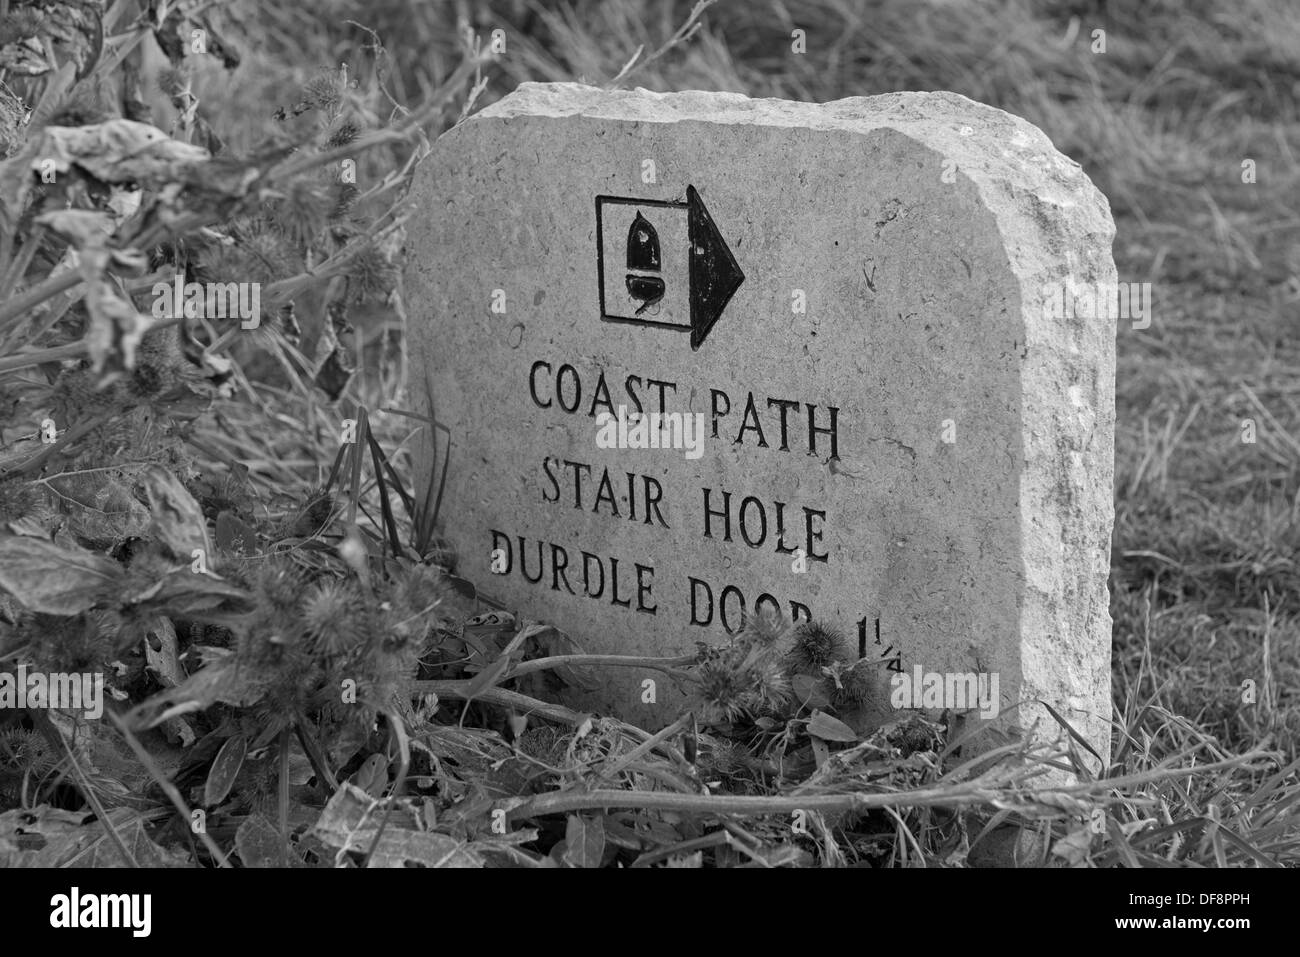 A Old Stone Path/Route Marker, Marks The Coastal Walk From Lulworth Cove To Durdle Door. Dorset, England, Uk (Black and white) Stock Photo